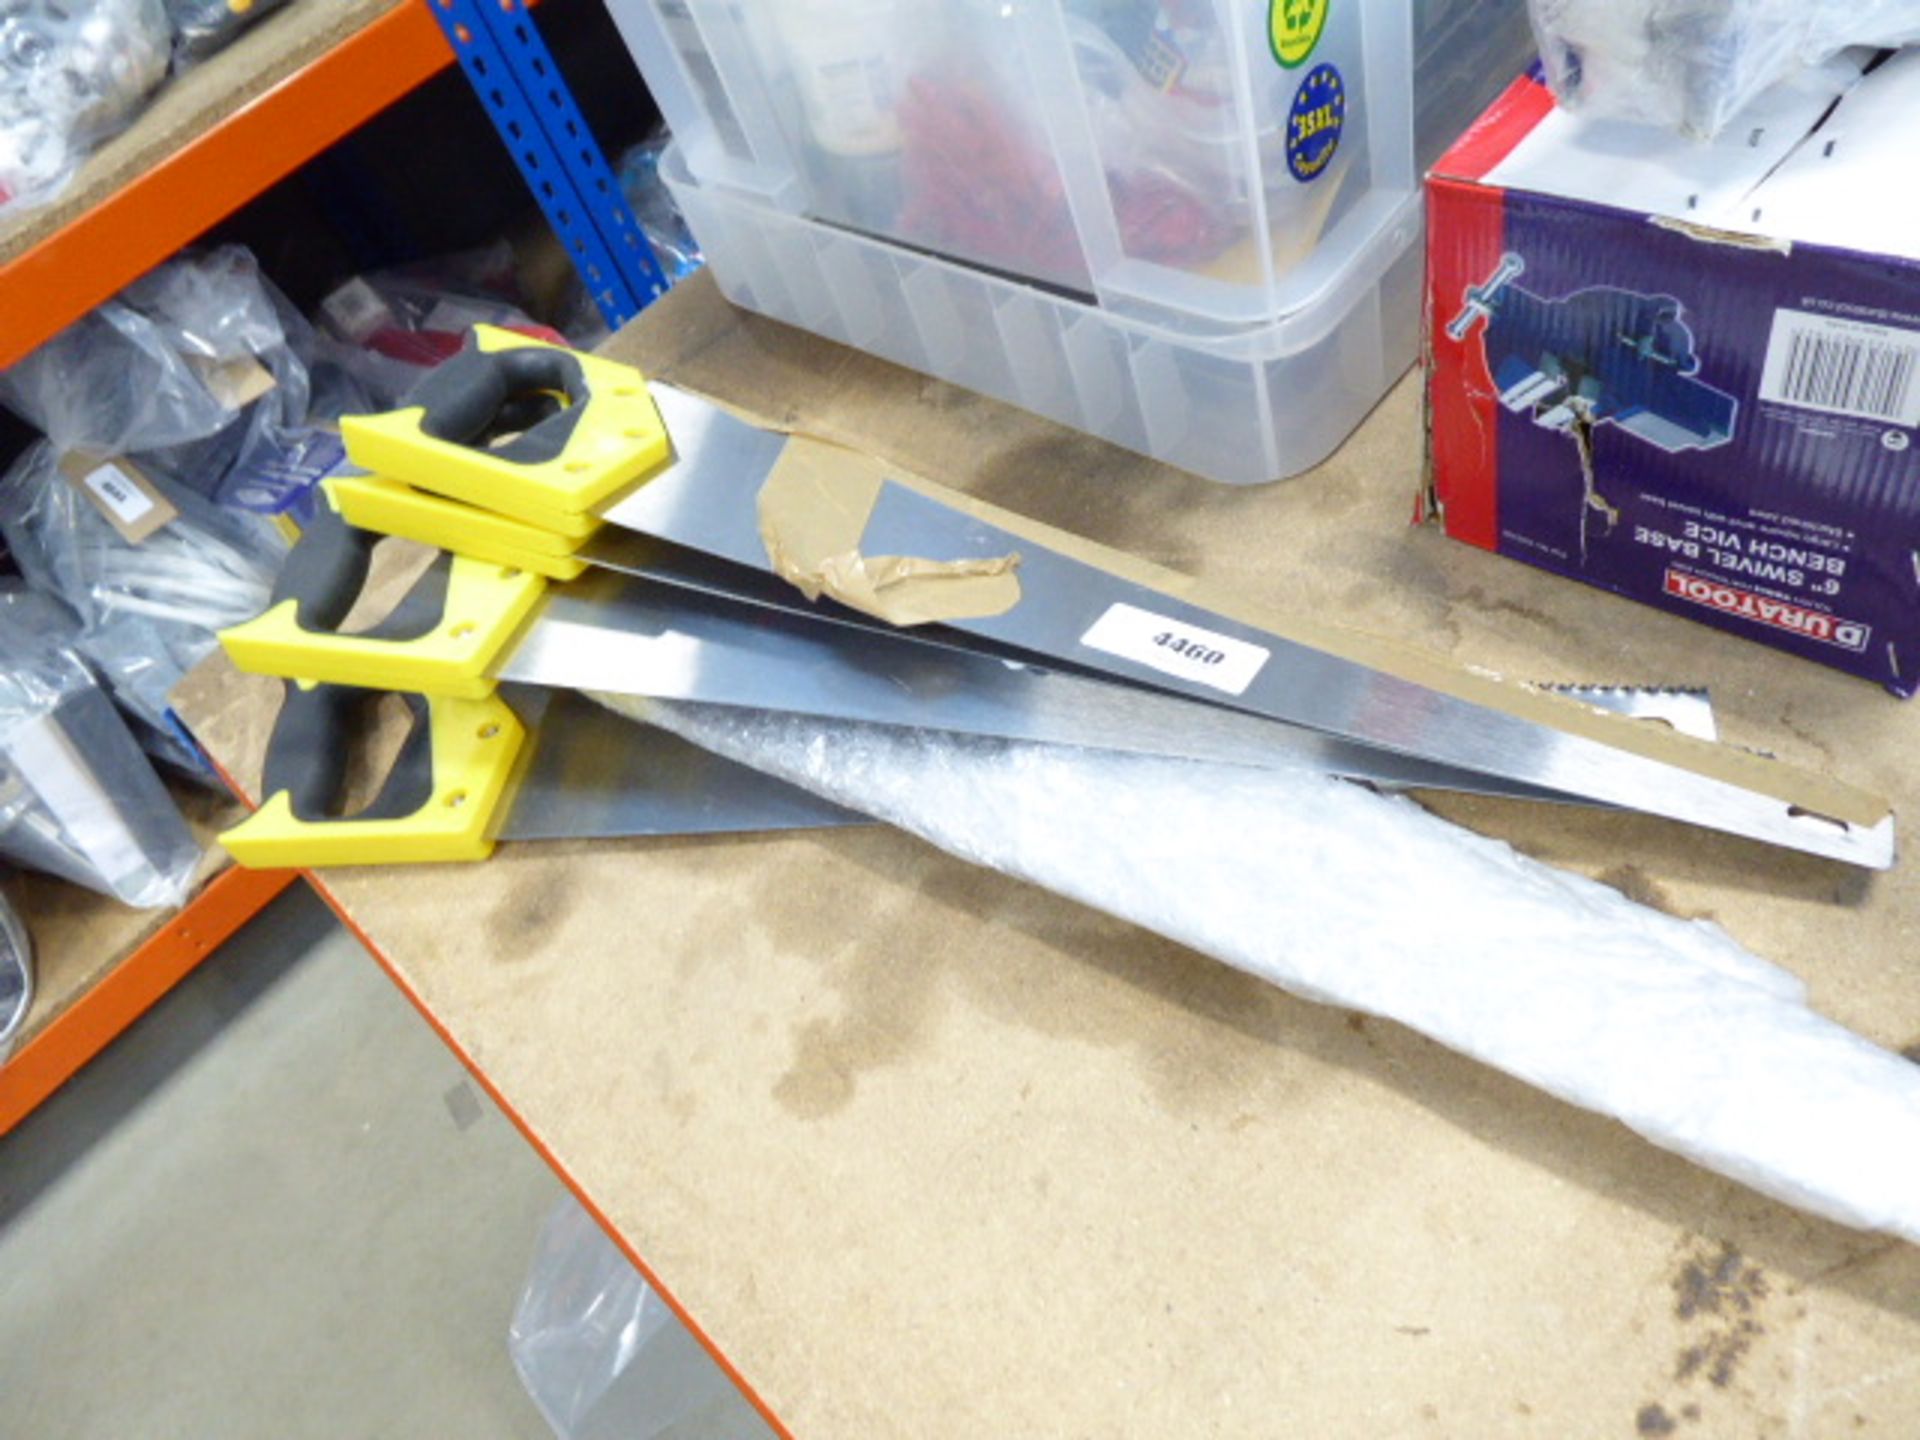 5 assorted hand saws